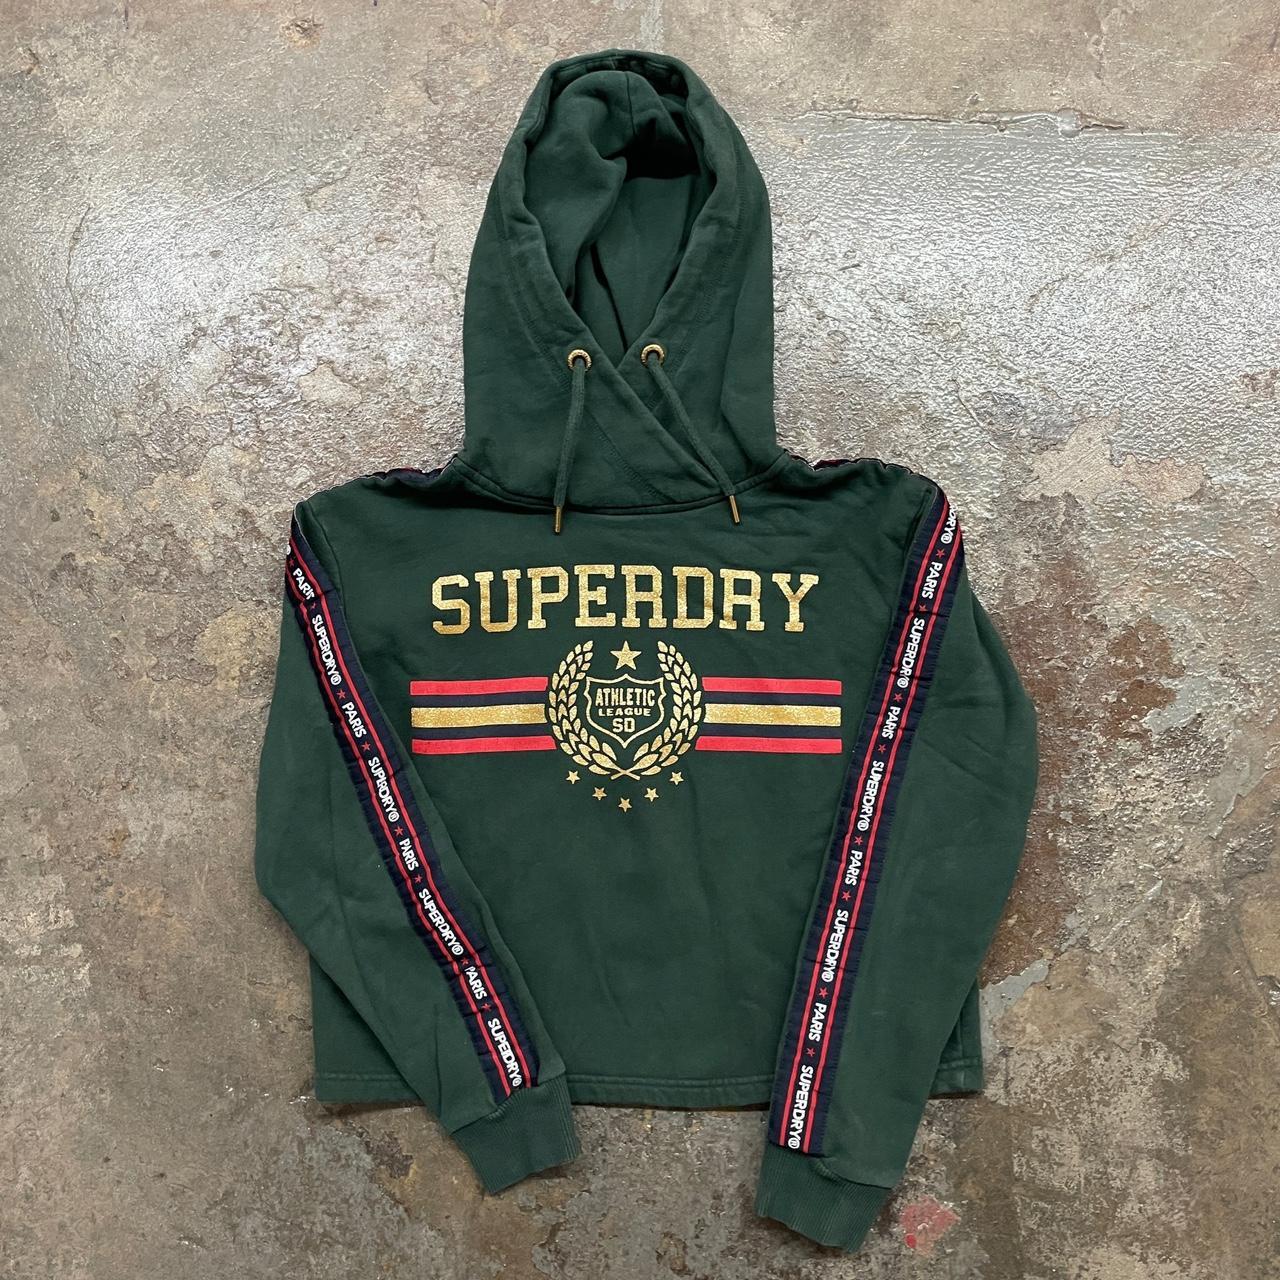 Product Image 2 - vintage superdry hoodie

Size: womens small/medium
Condition: